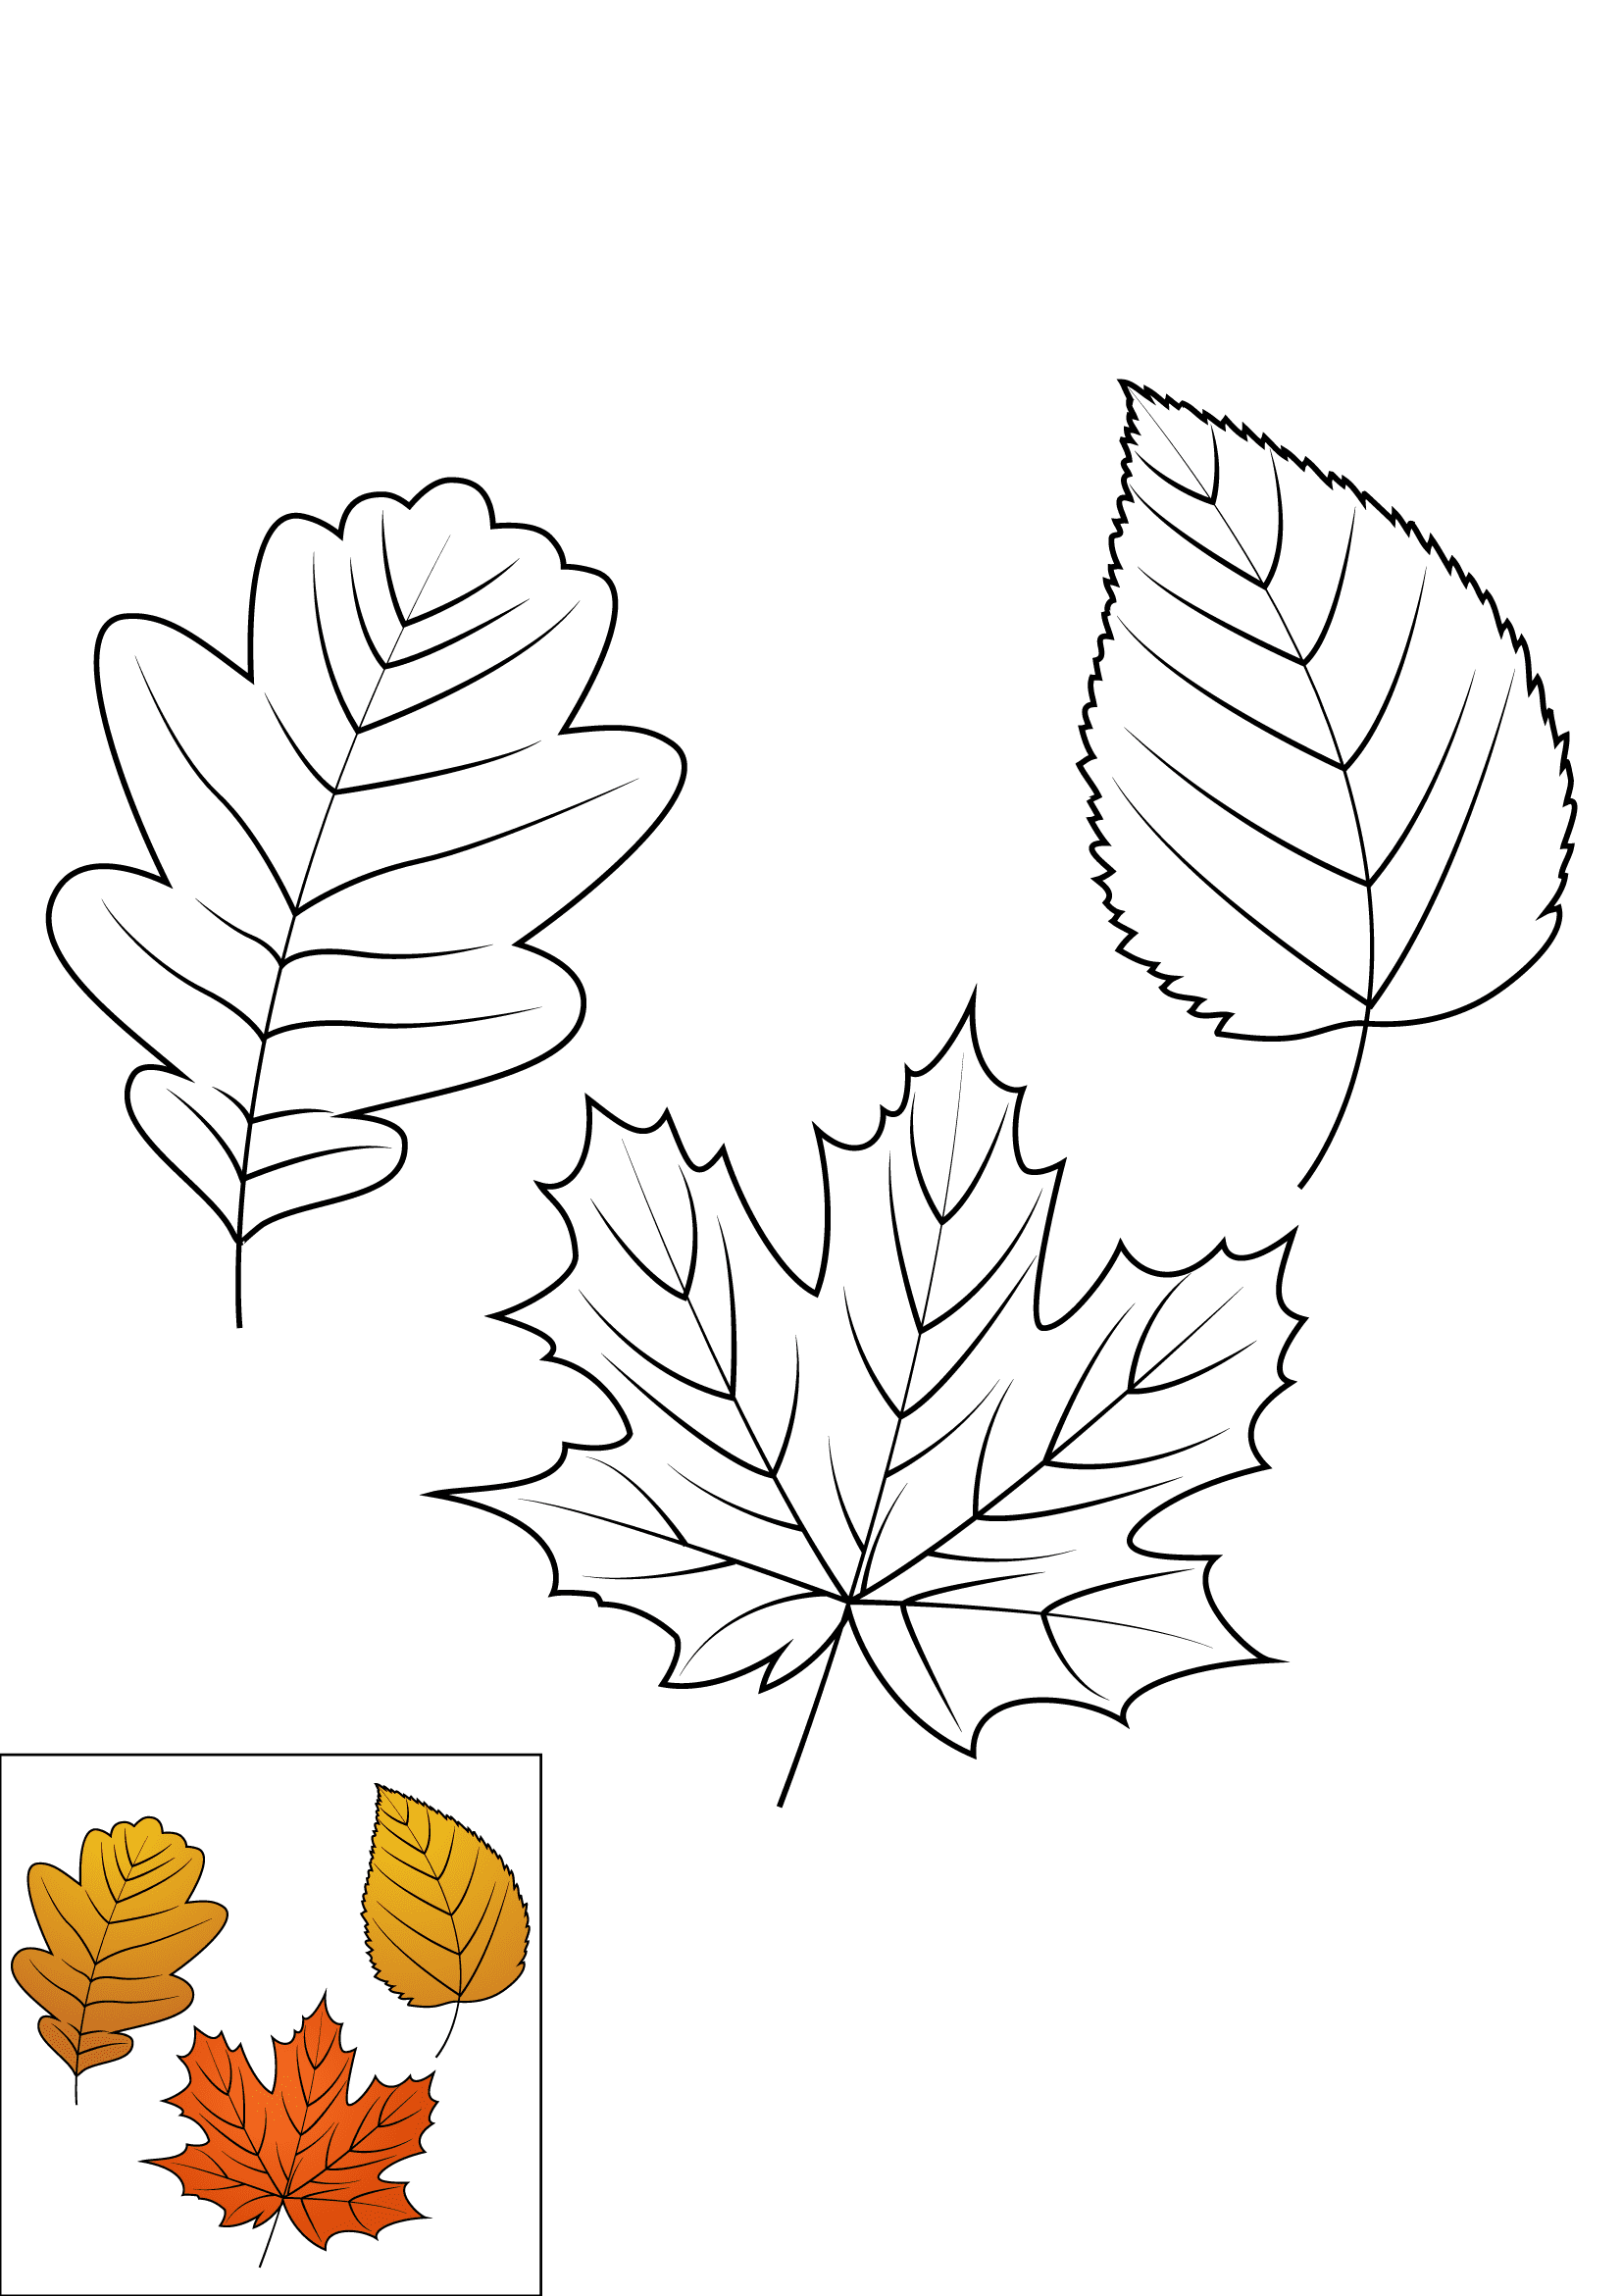 How to Draw Fall Leaves Step by Step Printable Color